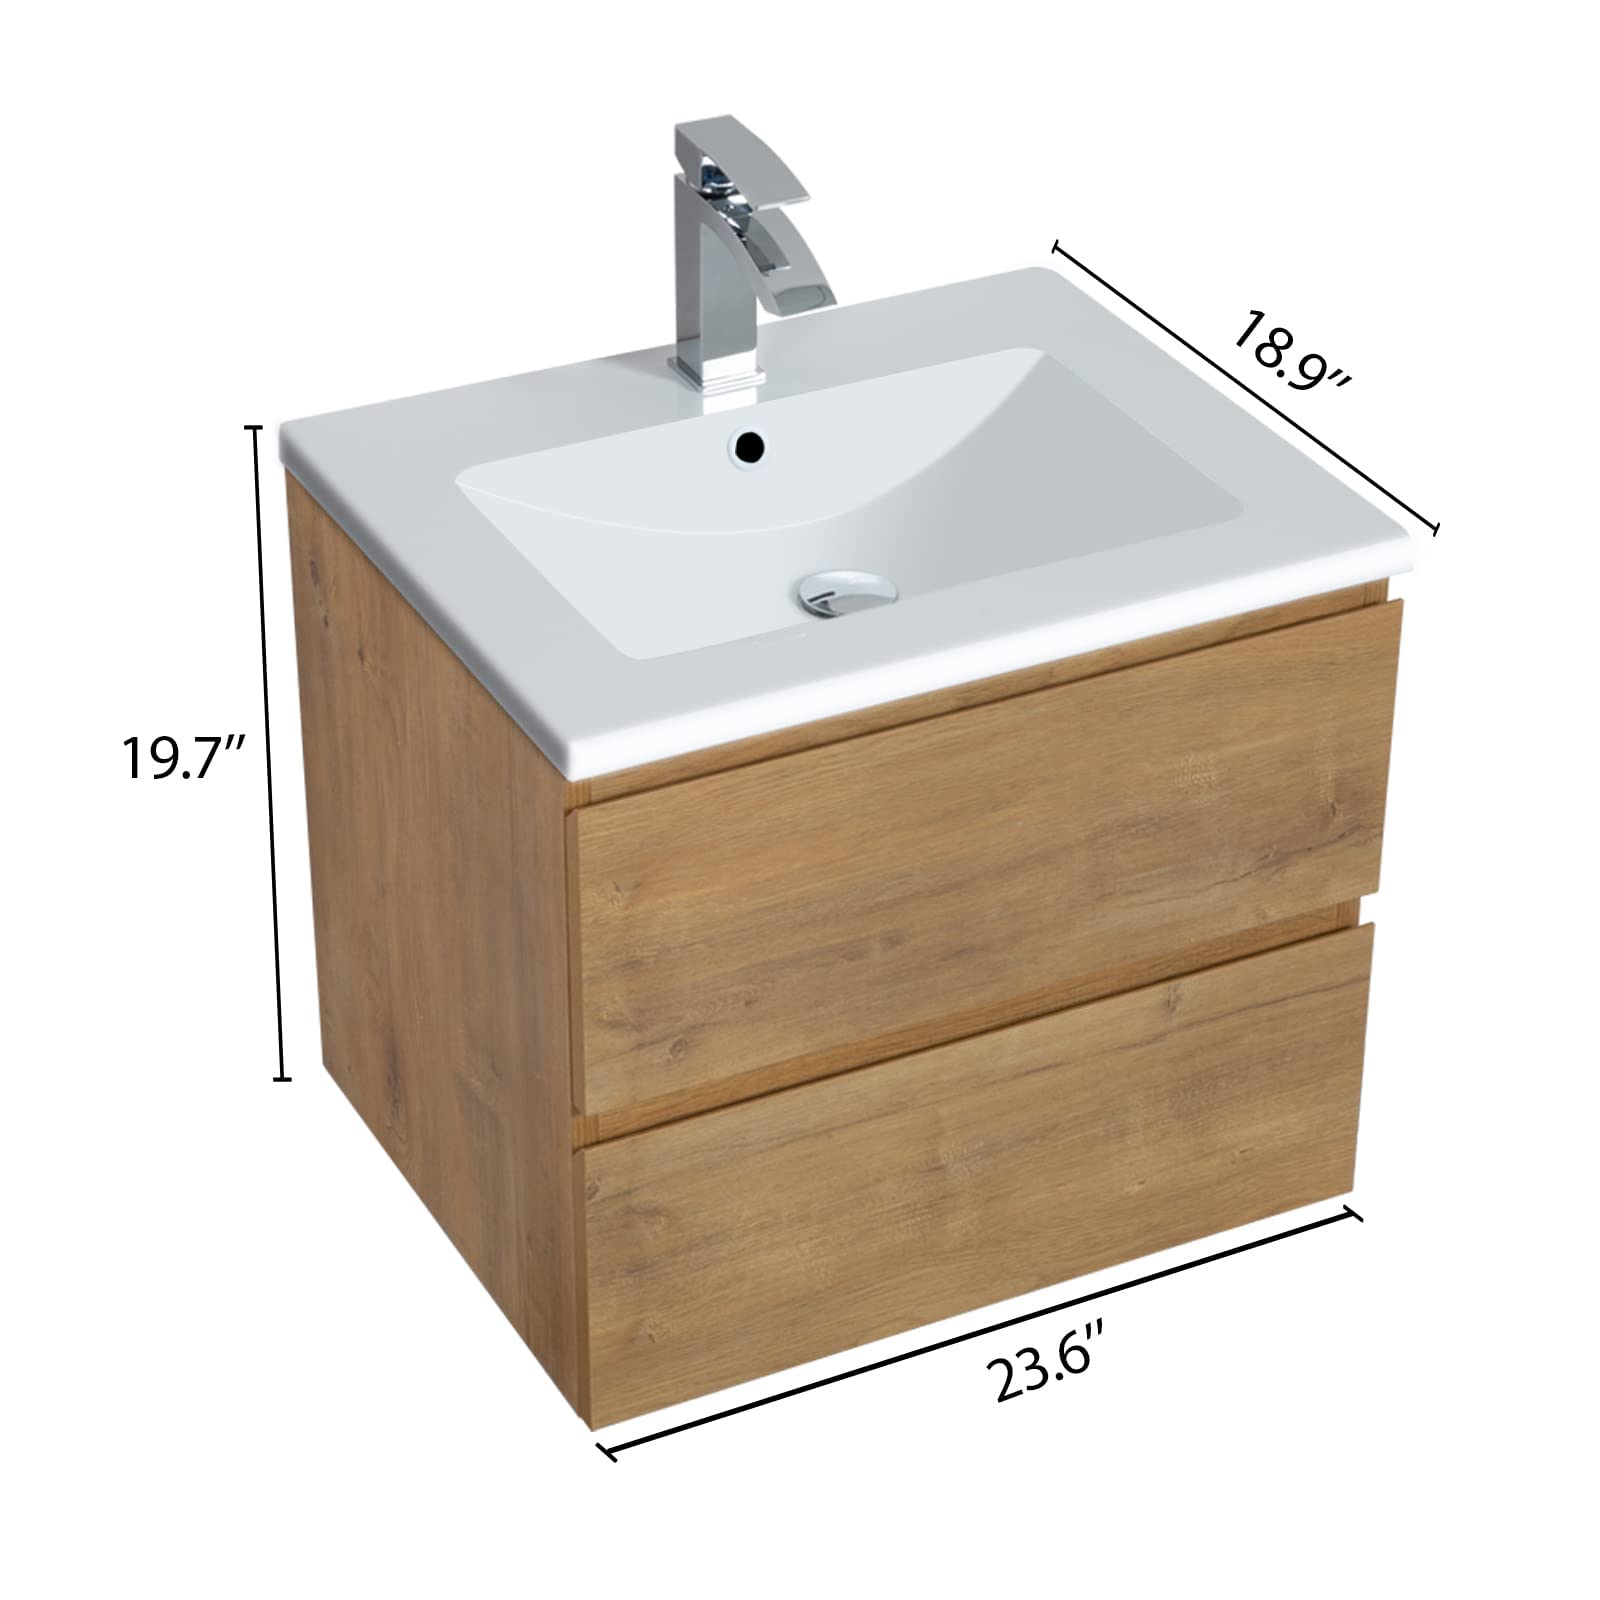 KSWIN 24" Wall Mounted Bathroom Vanity with Sink, Modern Floating Bathroom Cabinet with White Integrated Wash Basin